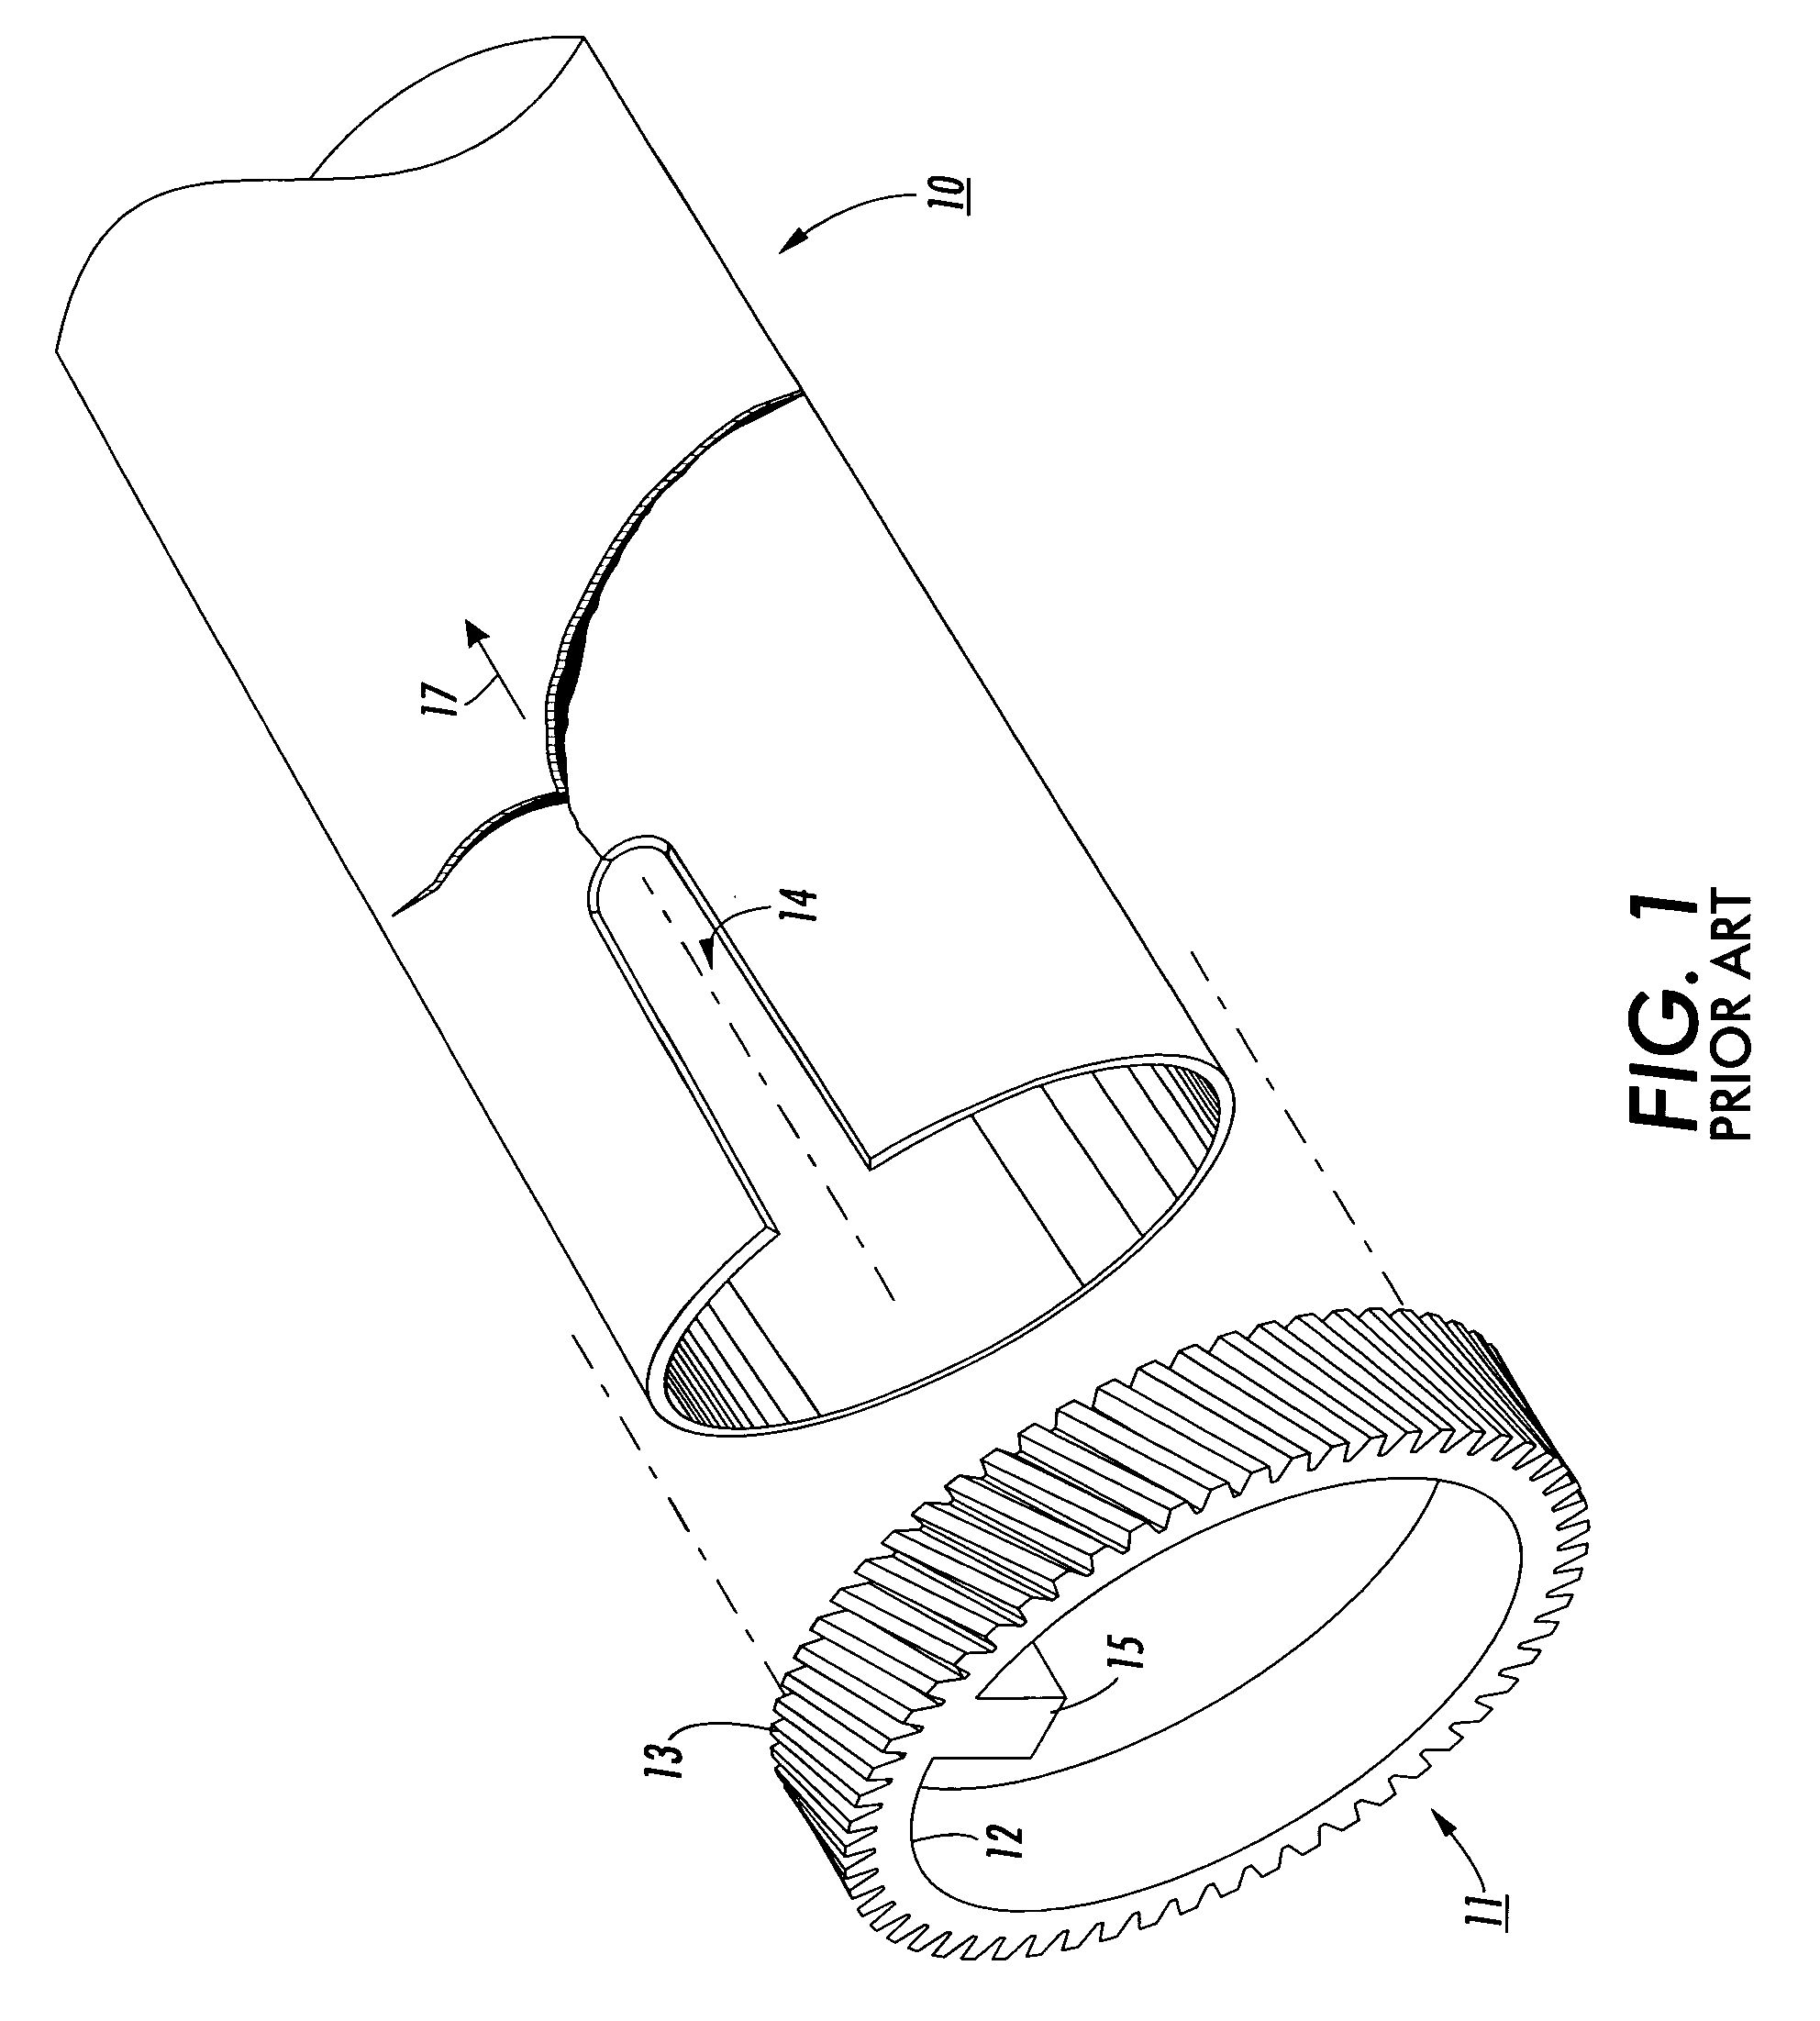 Thin walled fuser roll with stress redirected from axial to radial direction